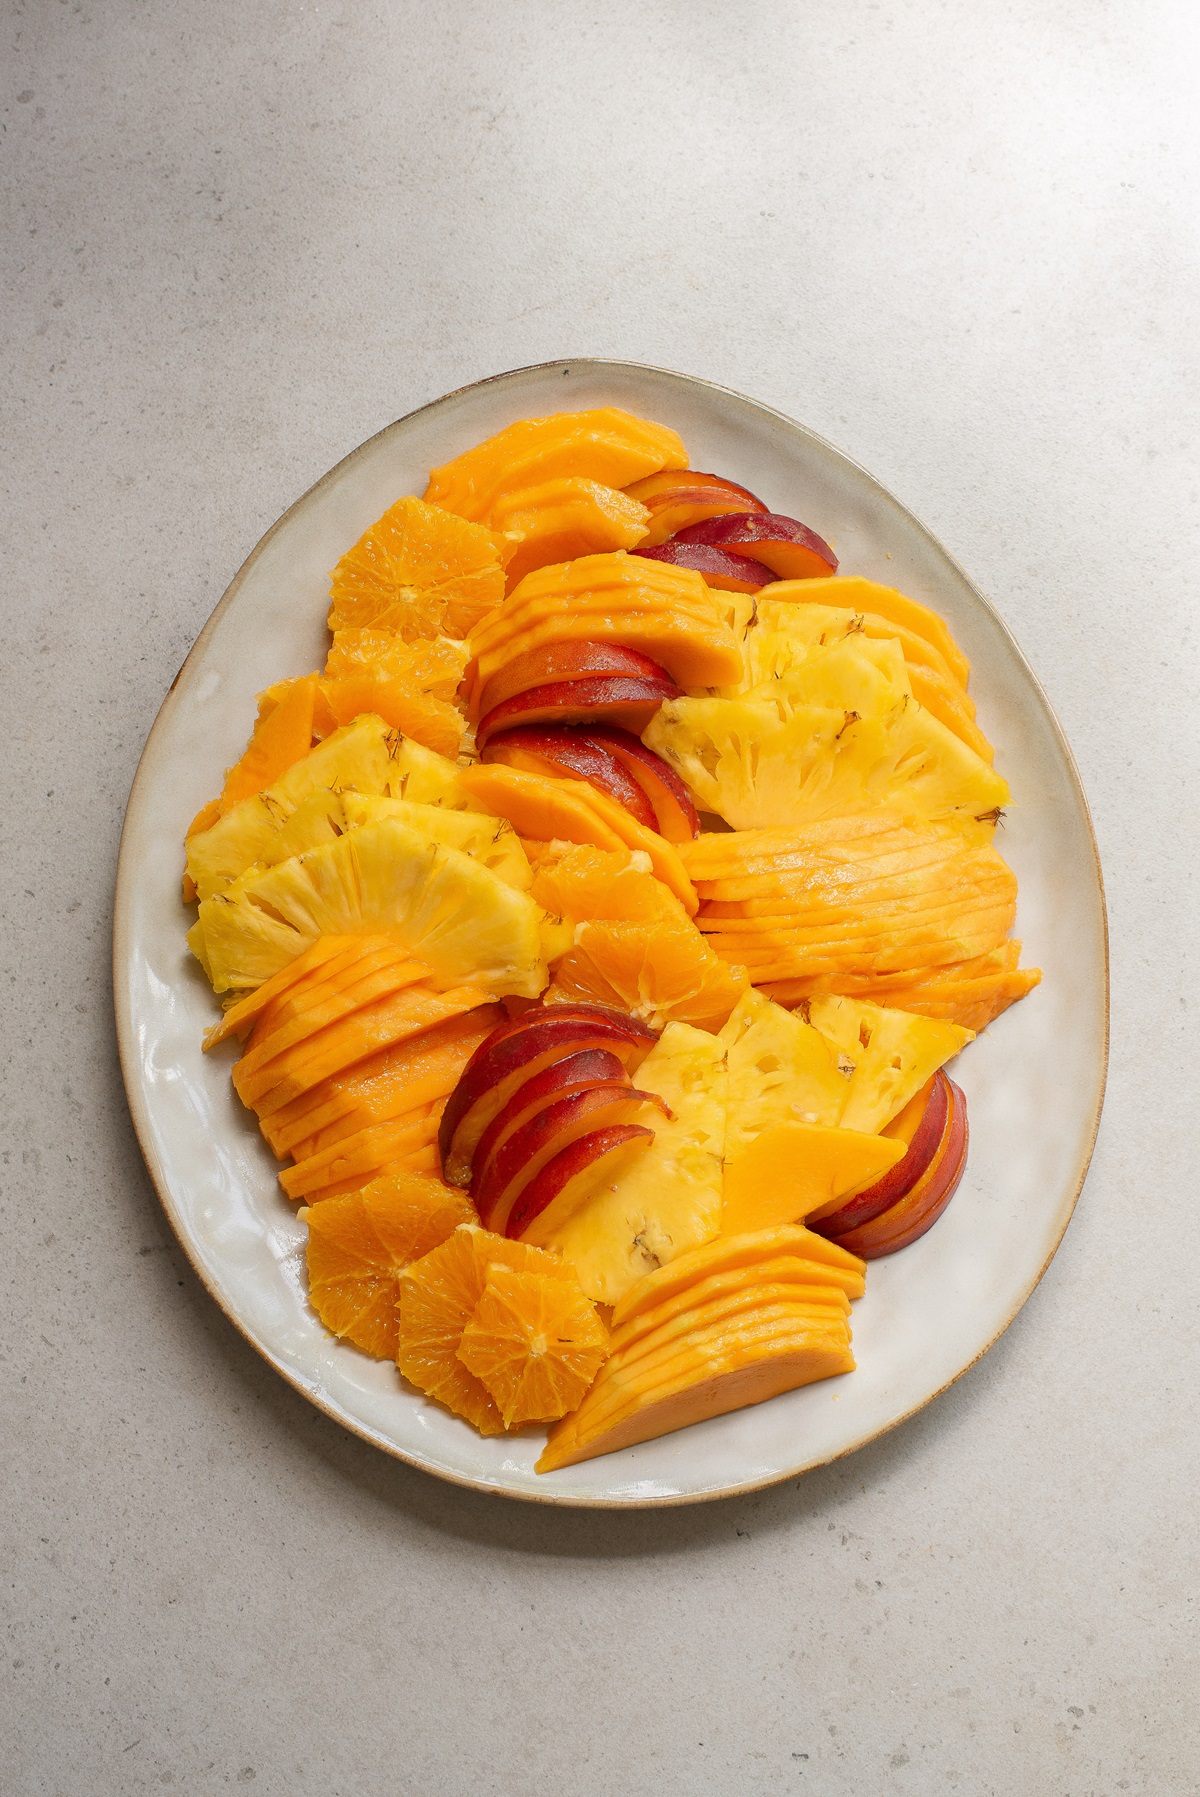 Fruit on a plate.